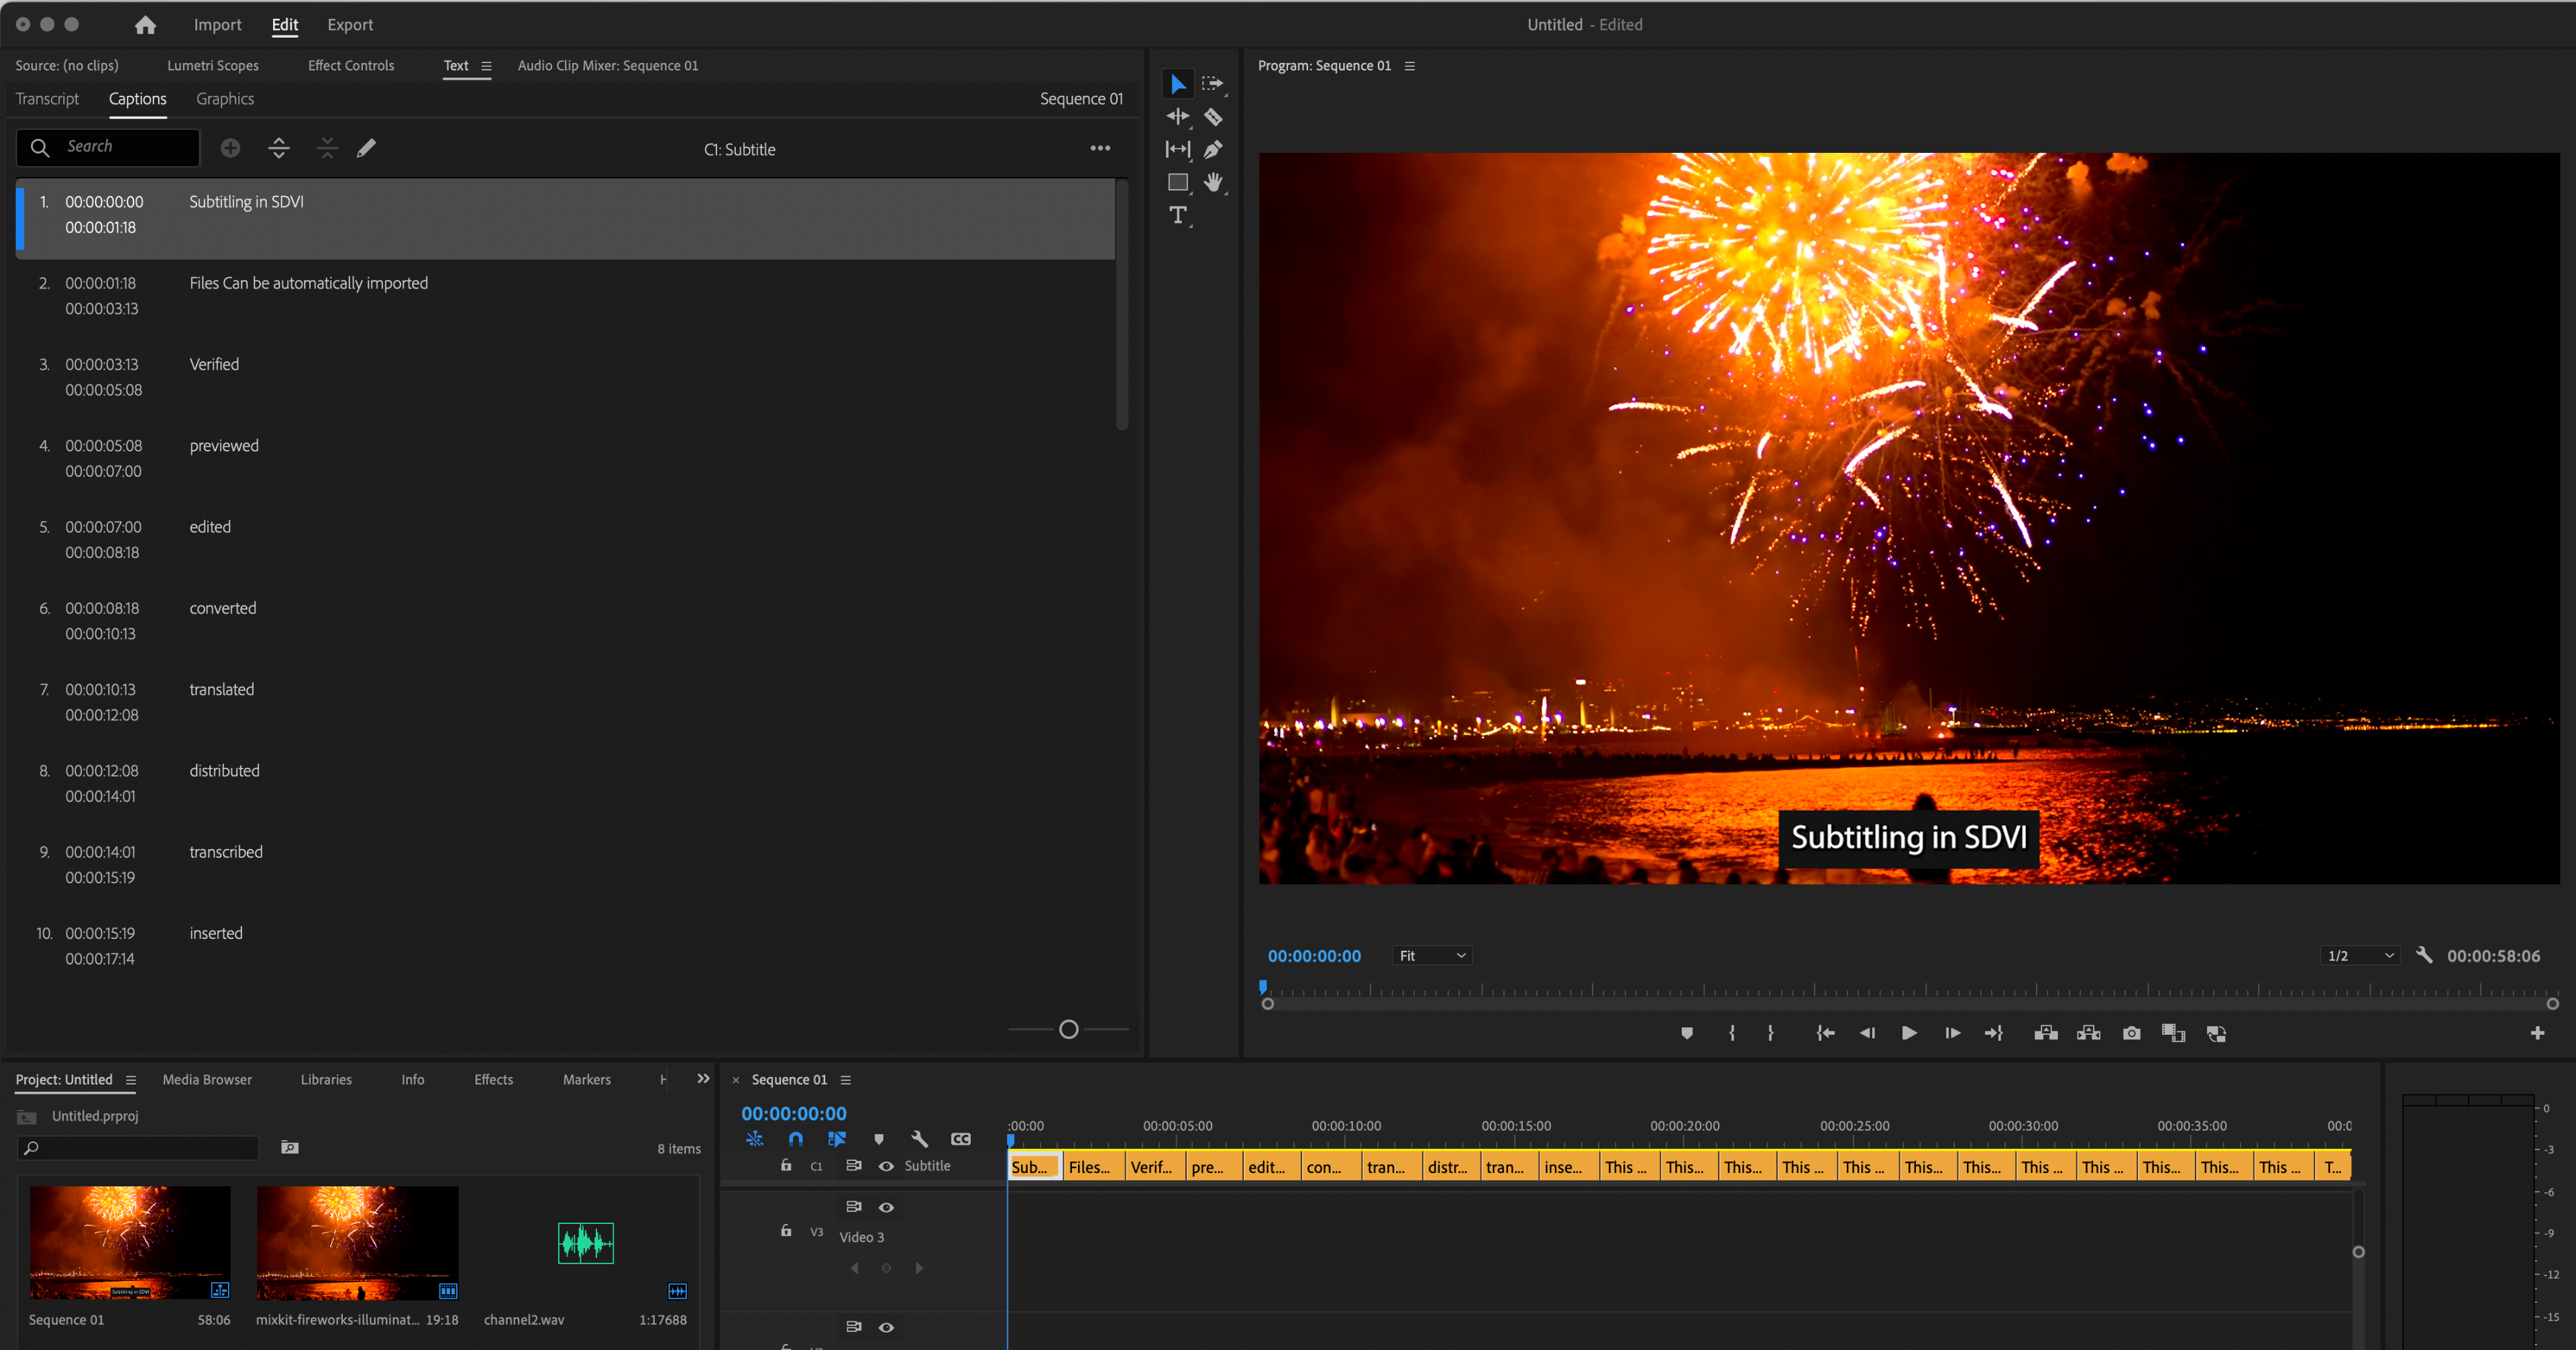 UI Of An Adobe Premiere Pro Edit Session With Visible Timeline, Subtitles, And SDVI Rally Access Panel With Workorders